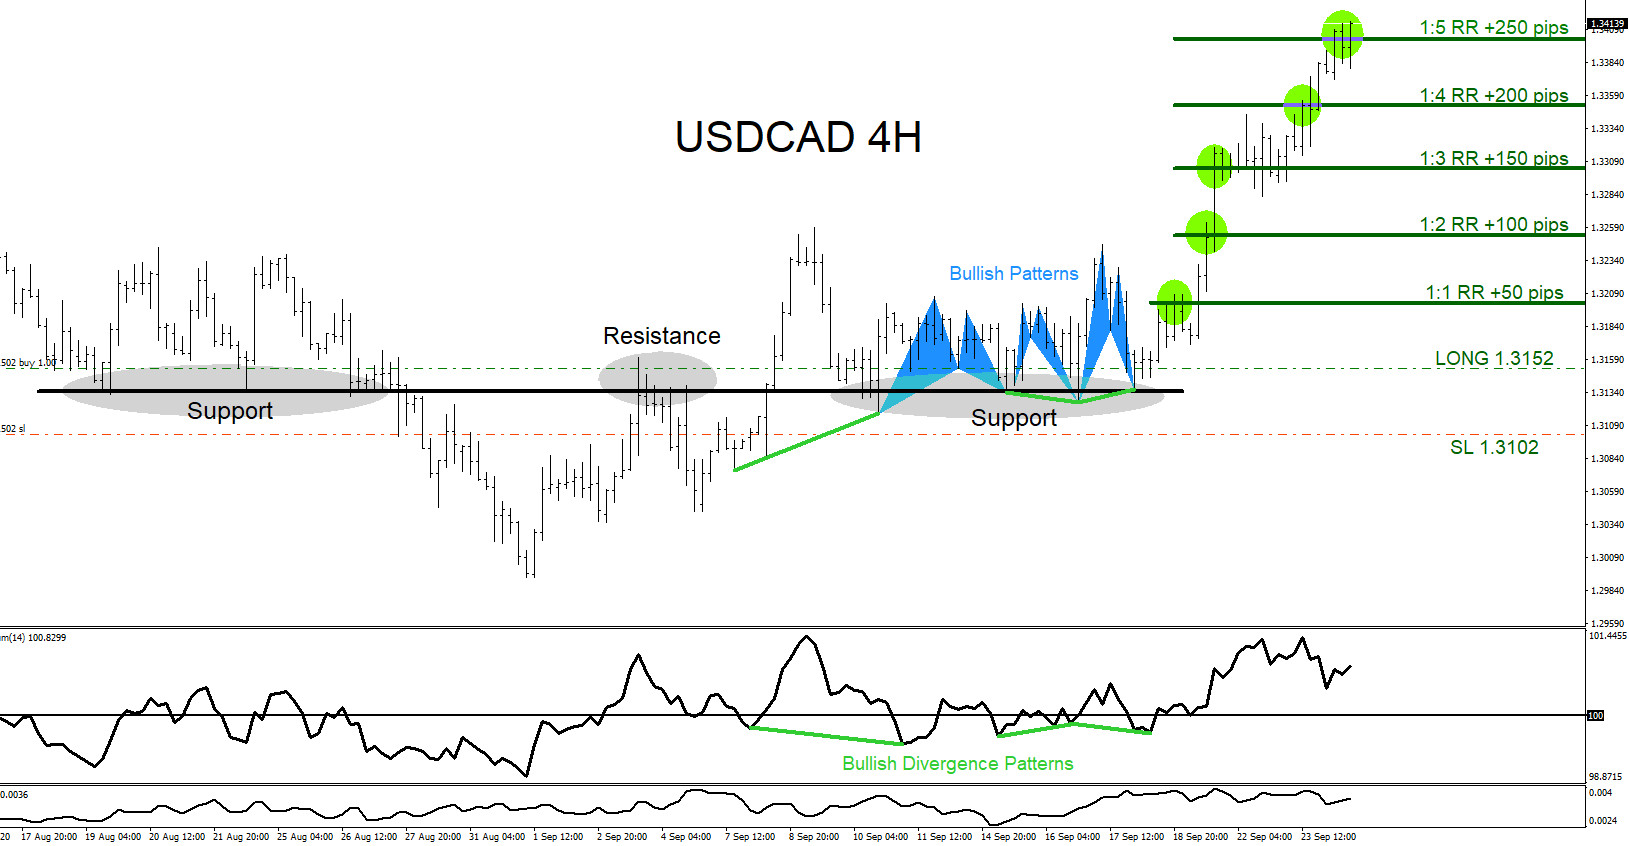 USDCAD : Market Patterns Calling the Move HIgher